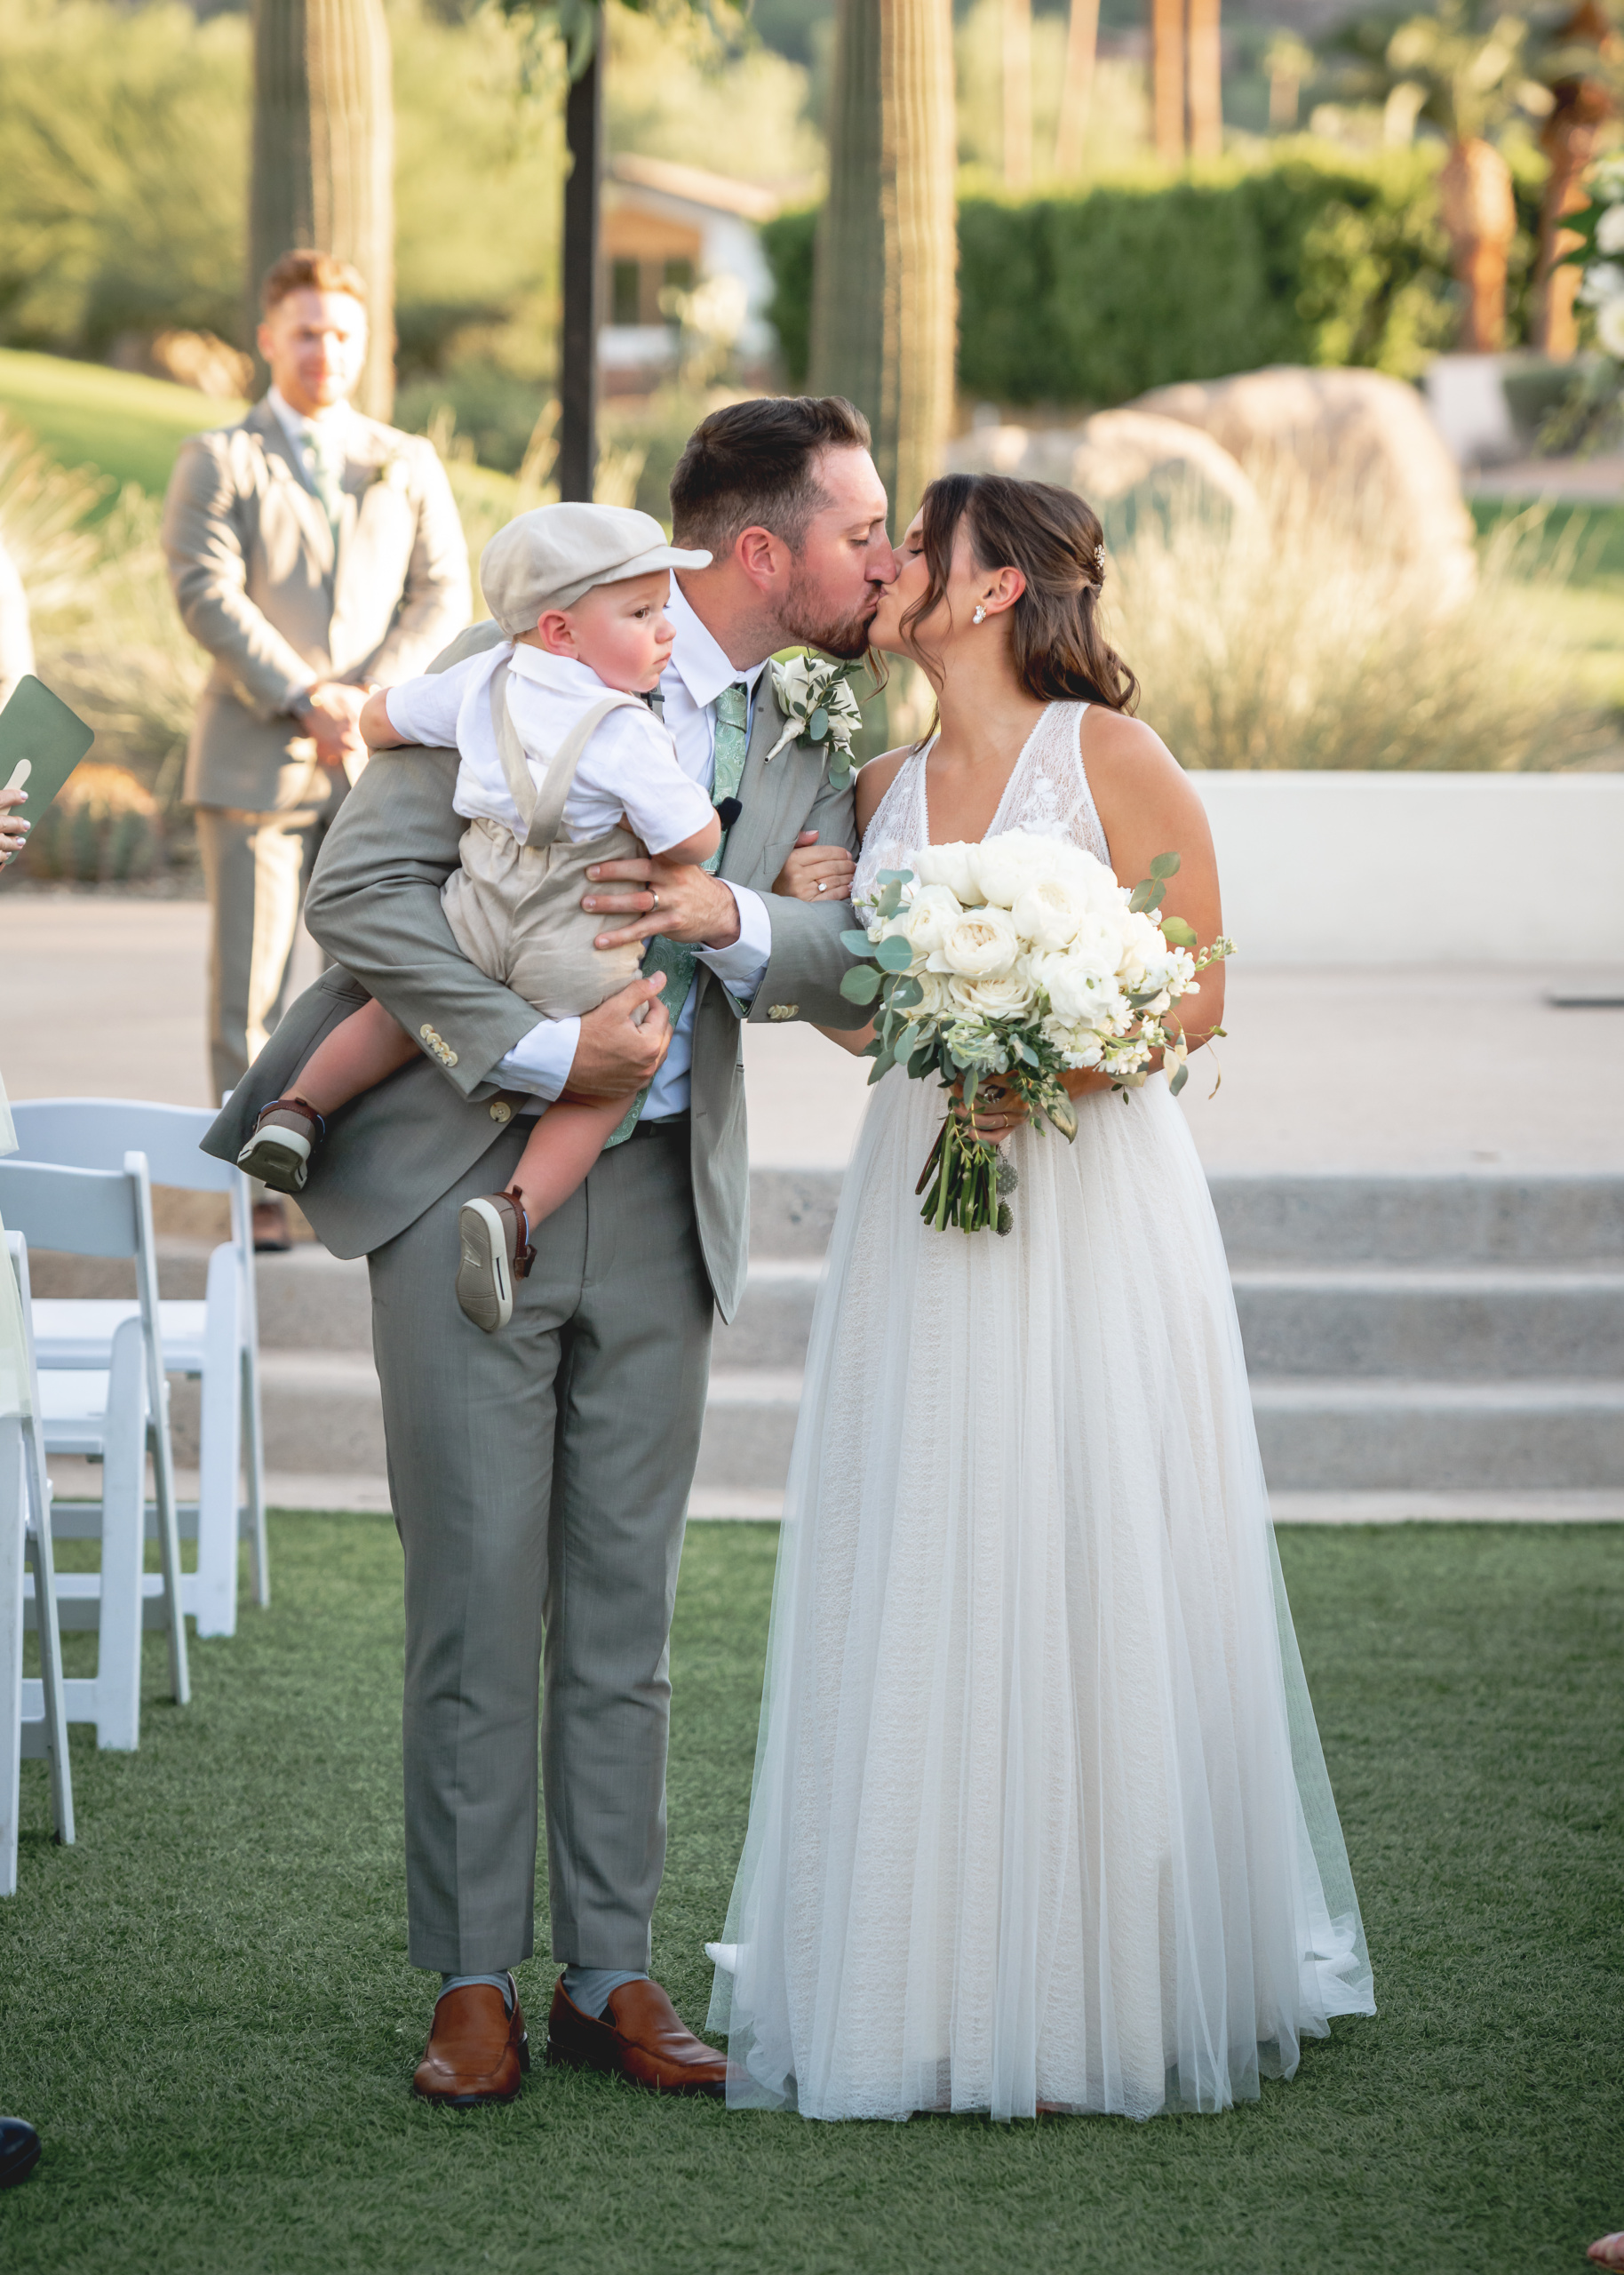 Newlyweds sharing a kiss with their child at an outdoor Scottsdale wedding ceremony